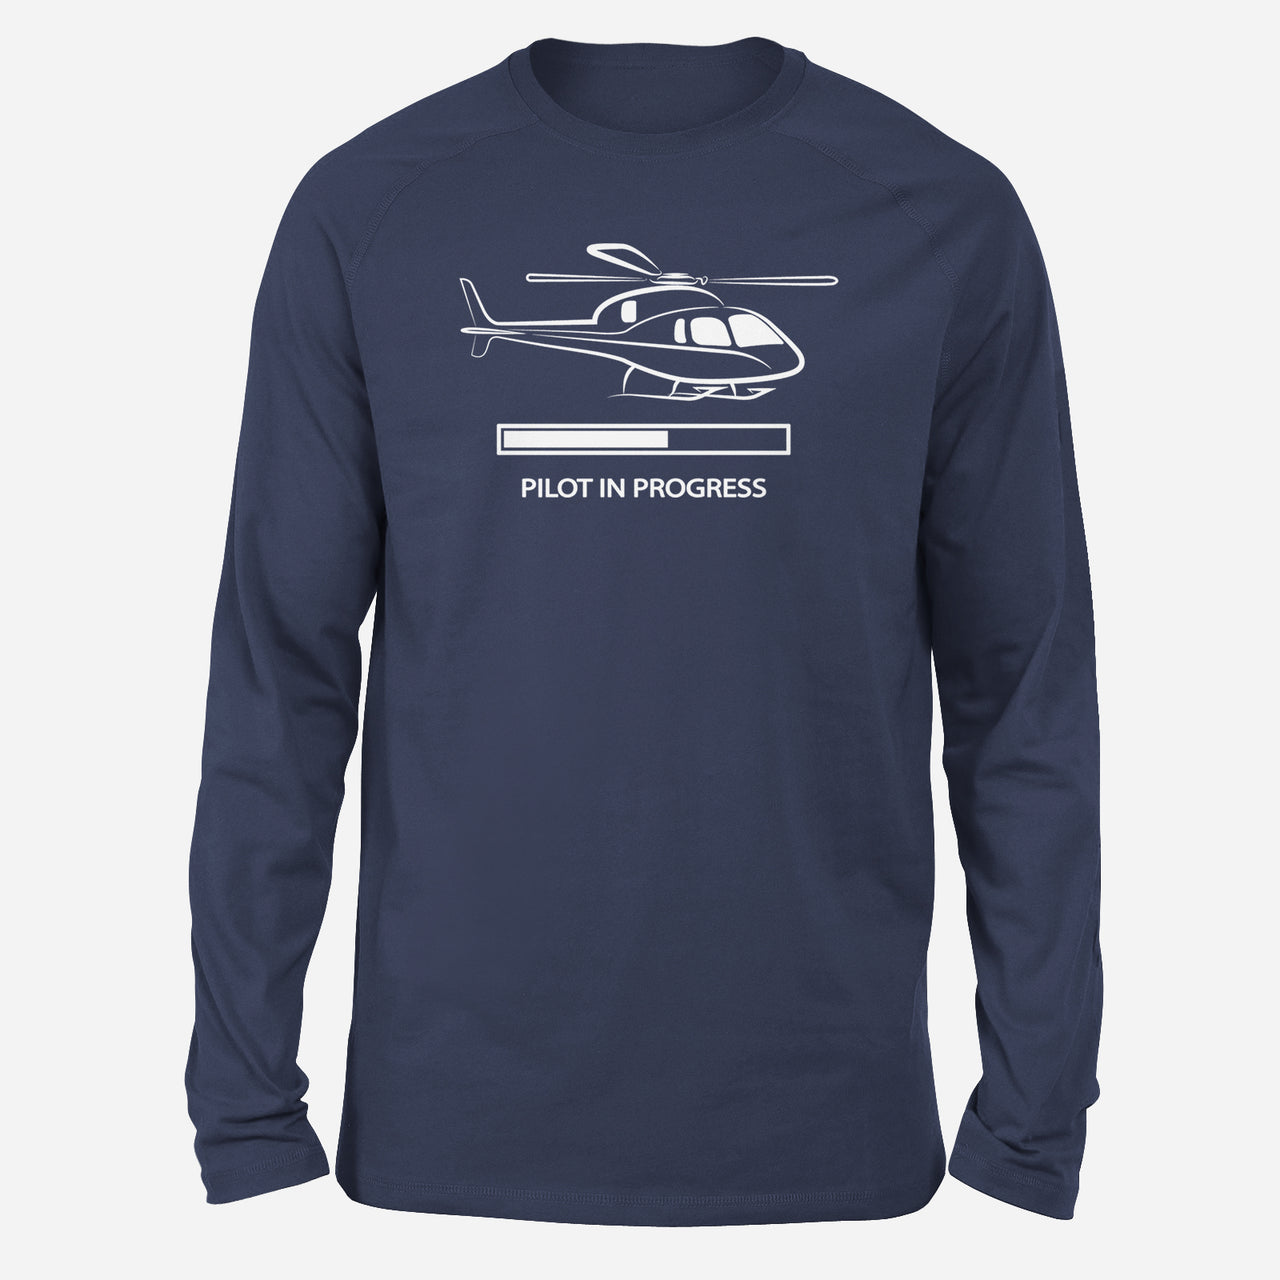 Pilot In Progress (Helicopter) Designed Long-Sleeve T-Shirts